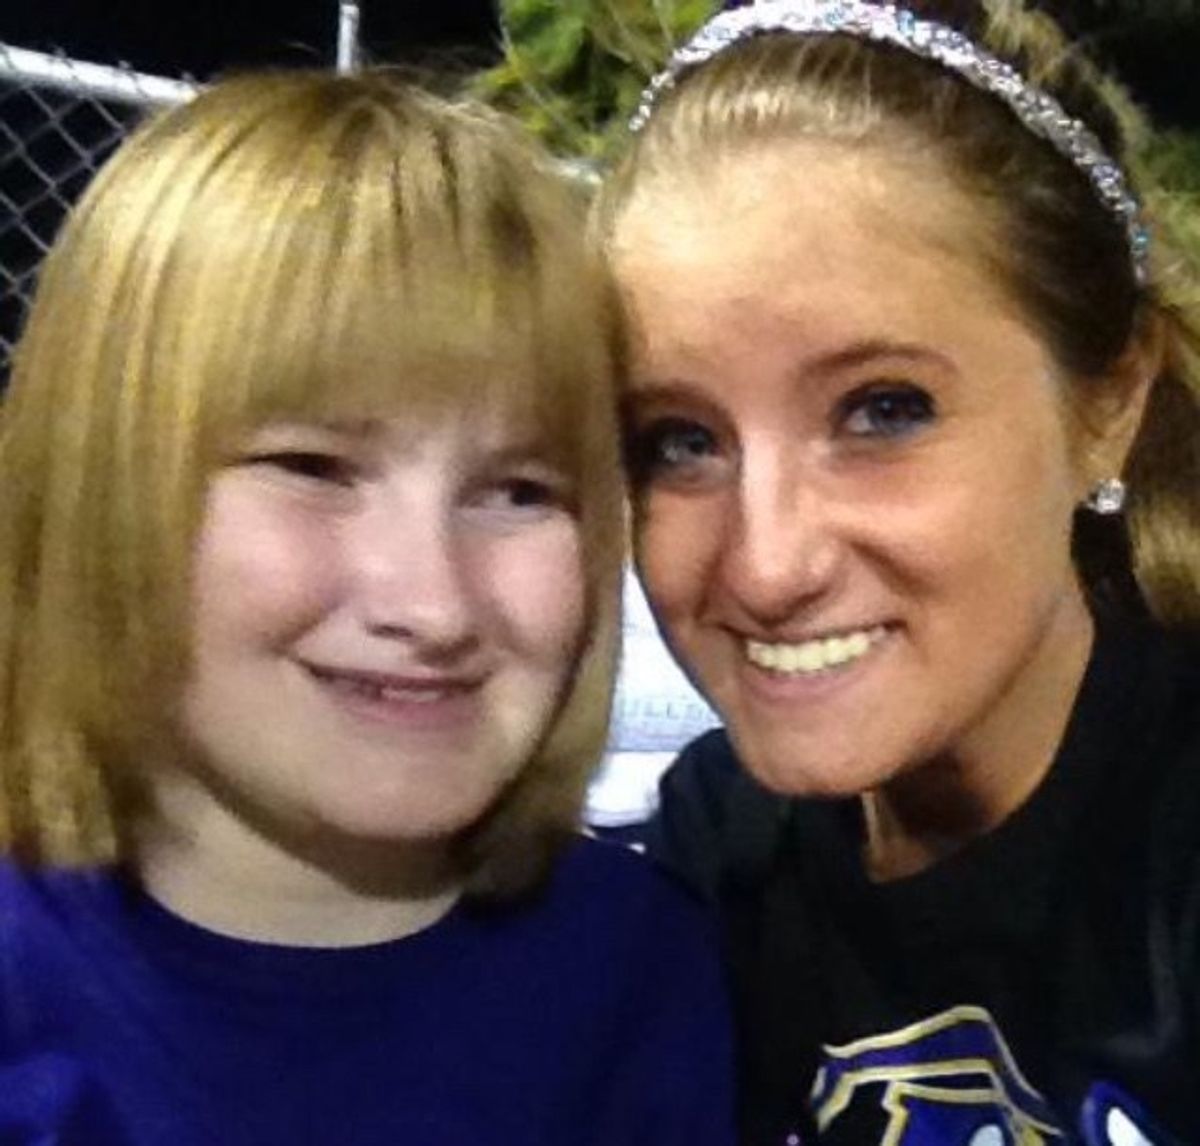 What No One Tells You About Growing Up With A Special Needs Sibling